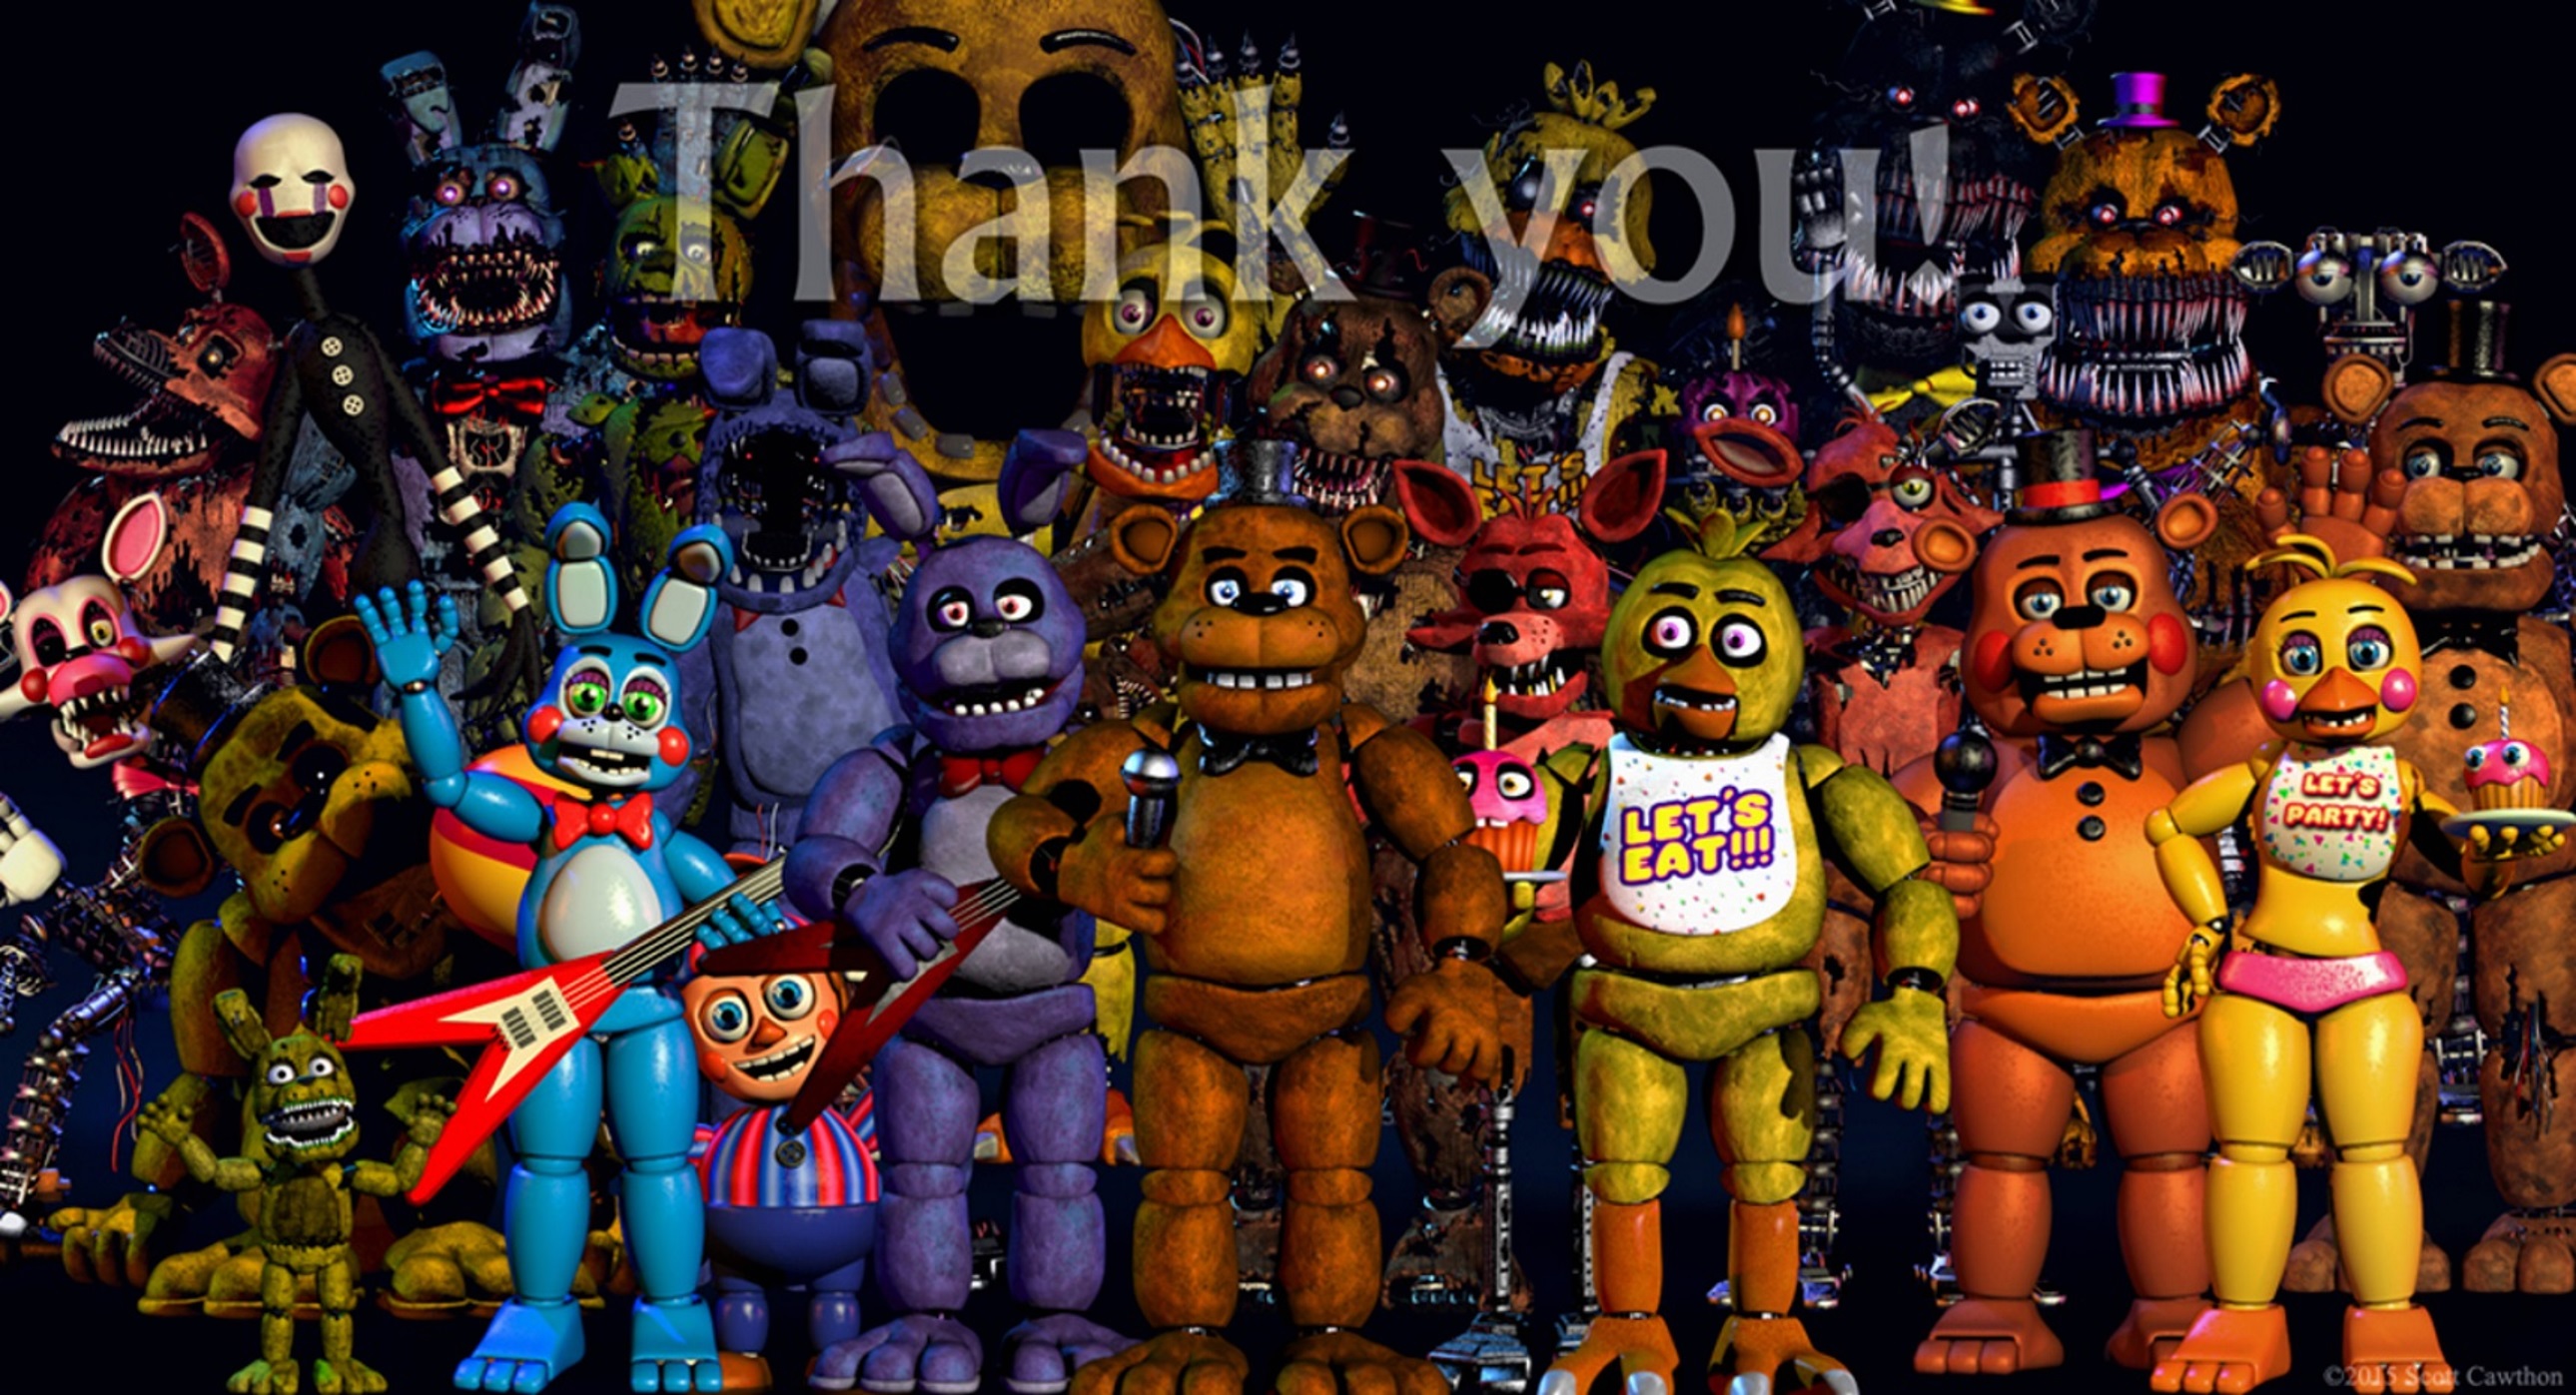 New posts in Show & Tell - Five Nights at Freddy's Community on